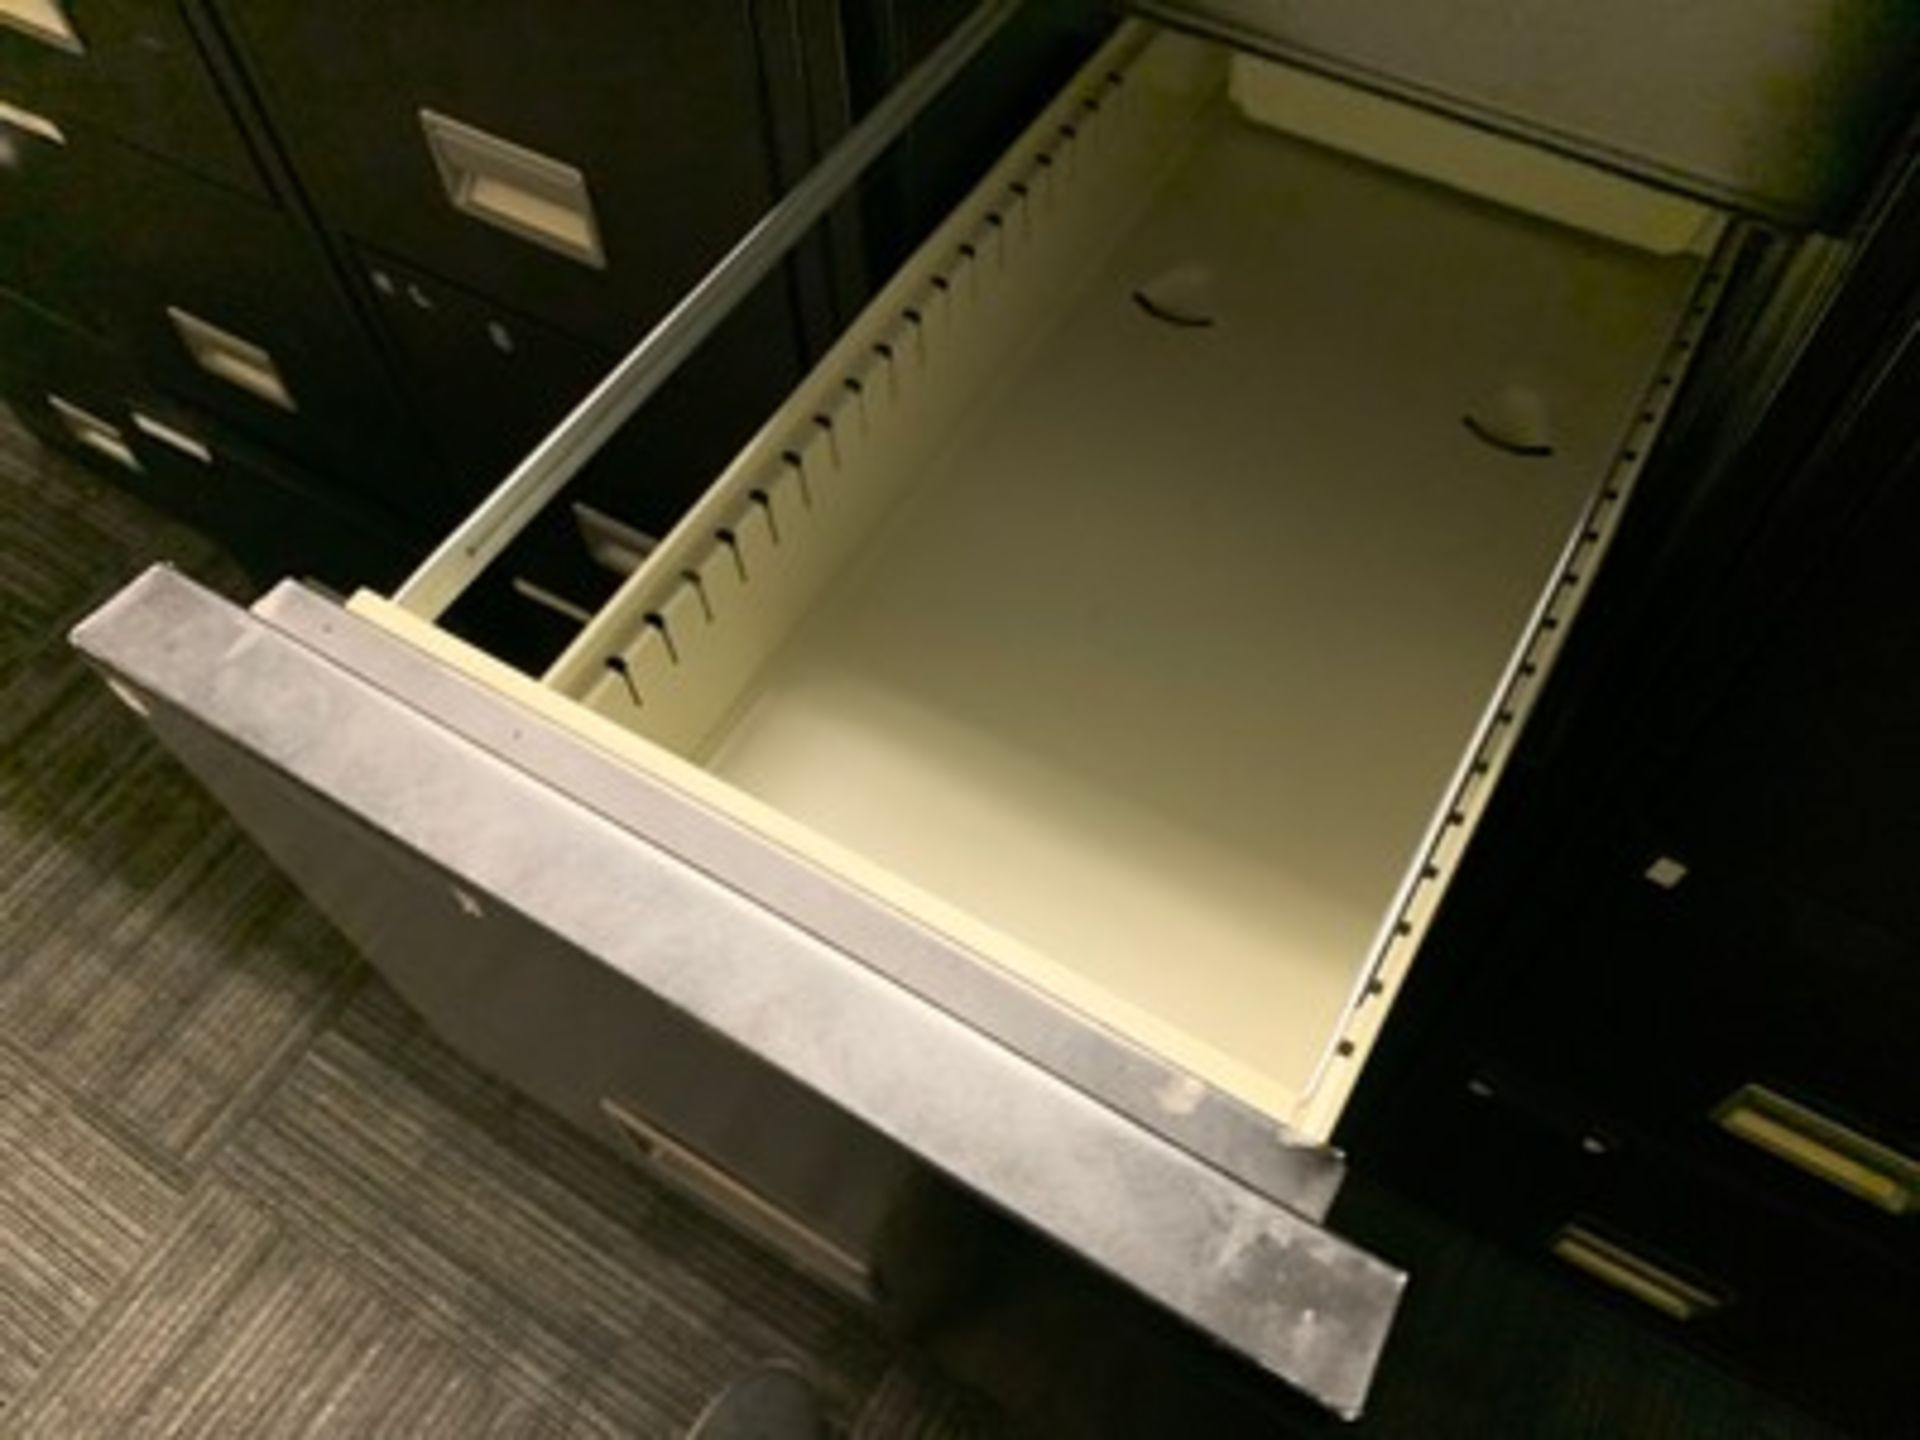 SCHWAB 5000 BLACK FILE CABINET WITH 4 DRAWERS - Image 2 of 3